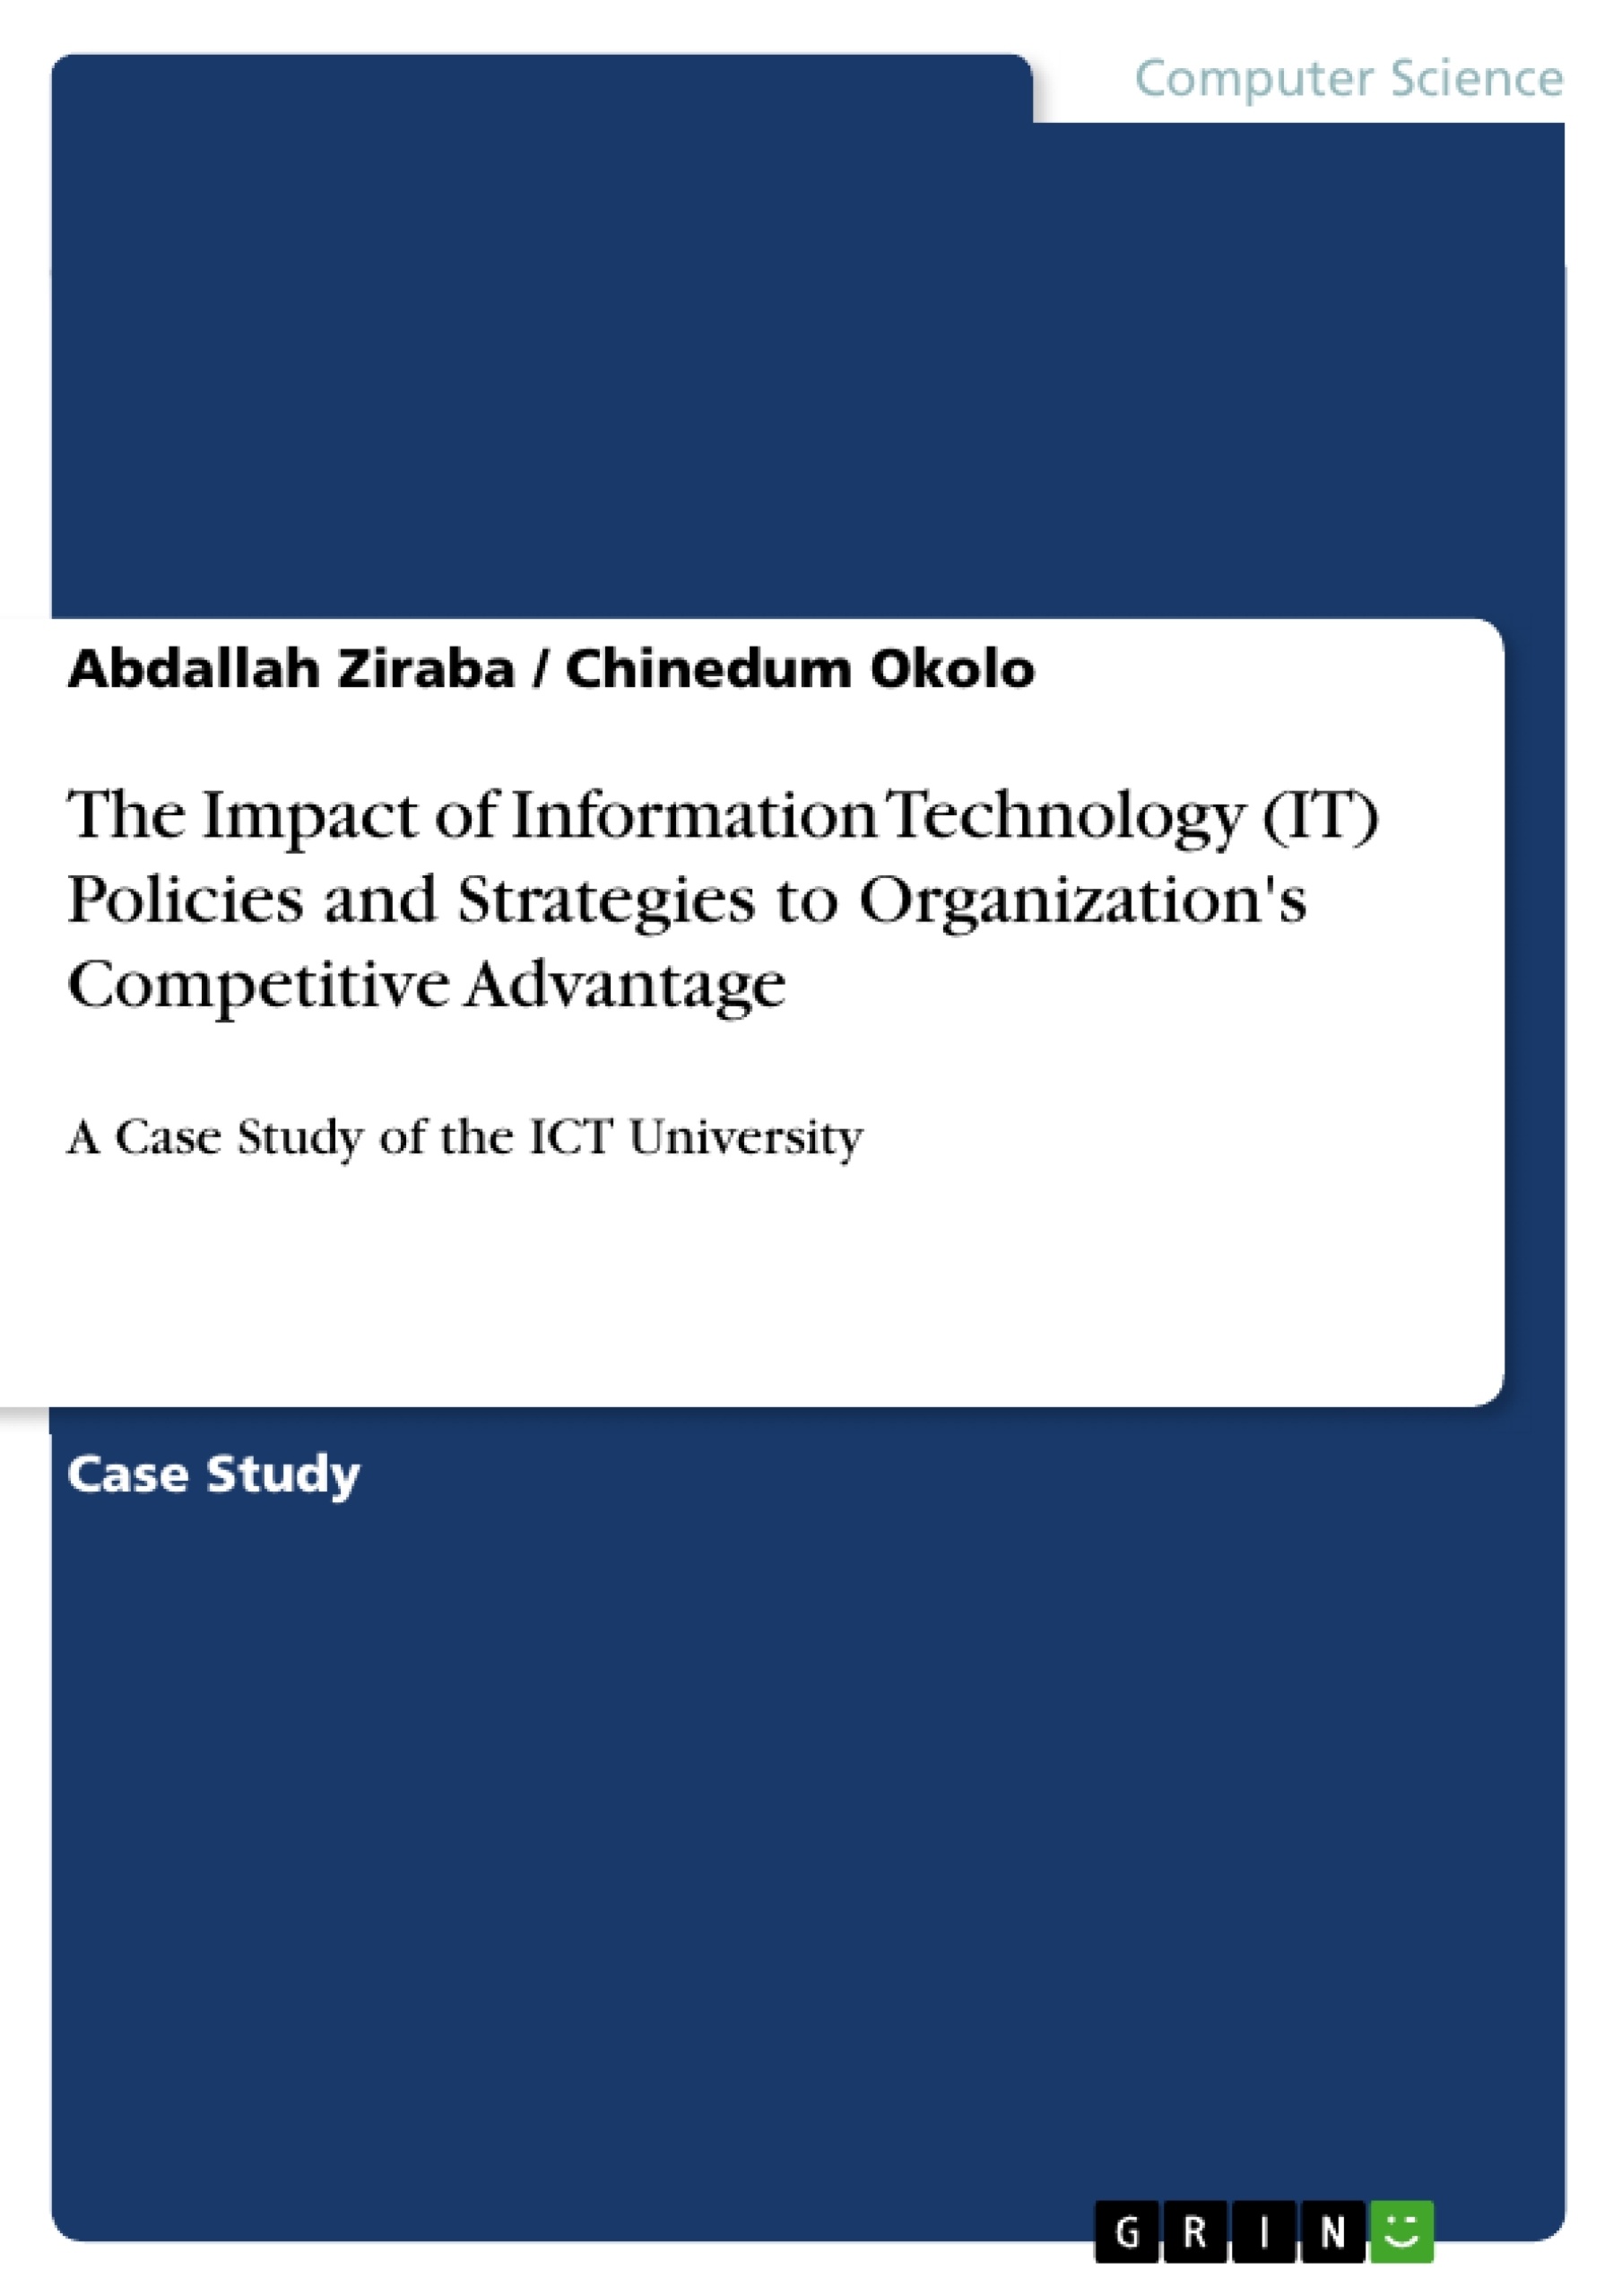 Title: The Impact of Information Technology (IT) Policies and Strategies to Organization's Competitive Advantage